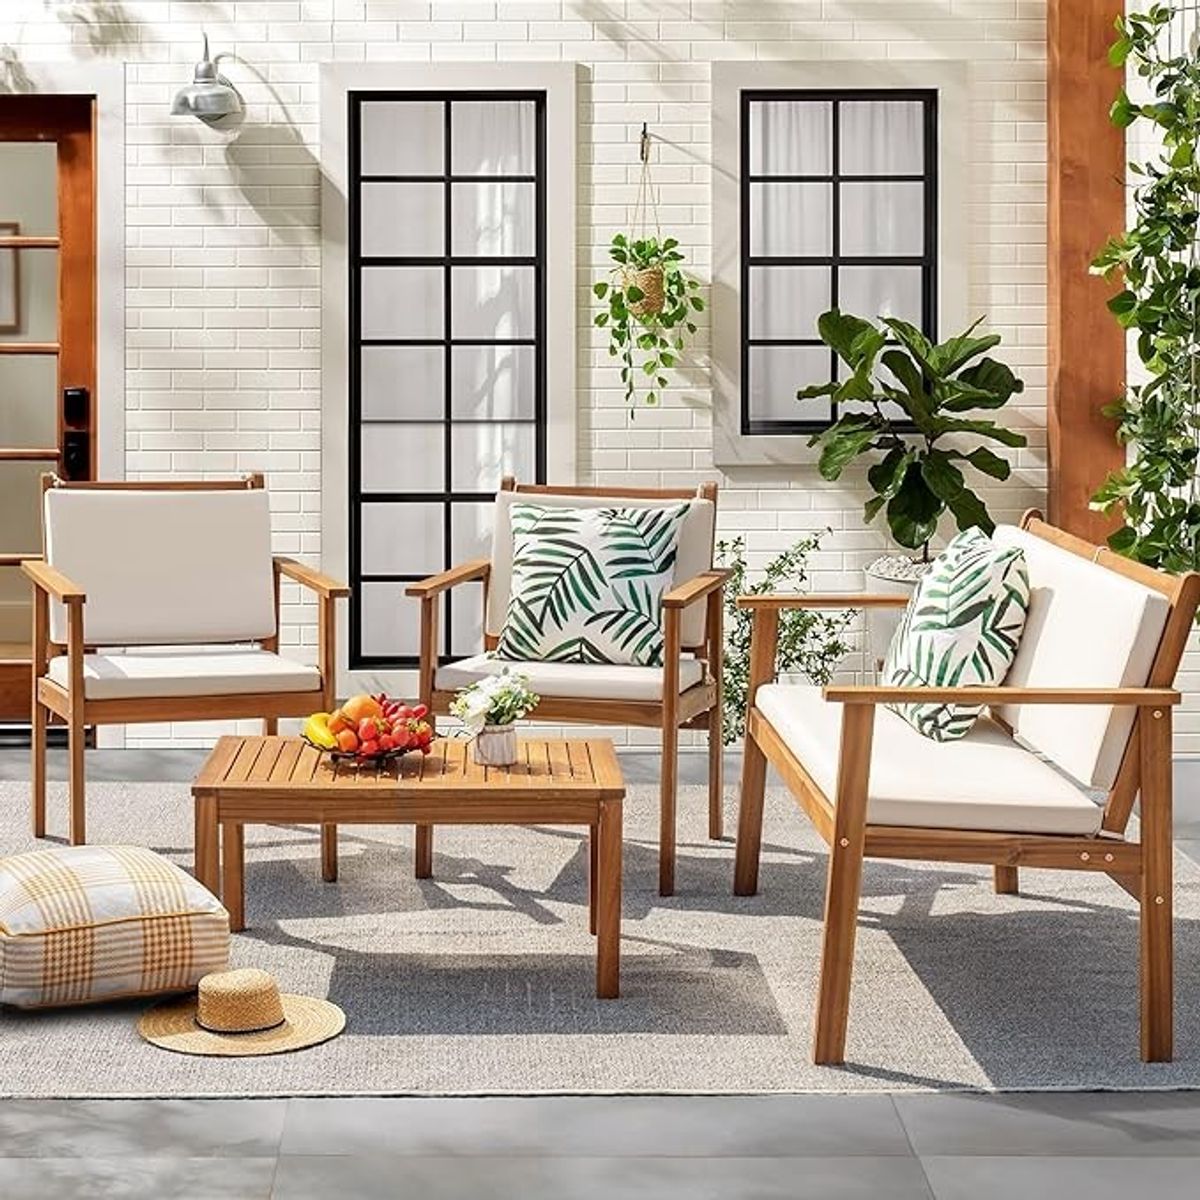 Make Your Patio The Neighborhood Hangout Spot With These 32 Products